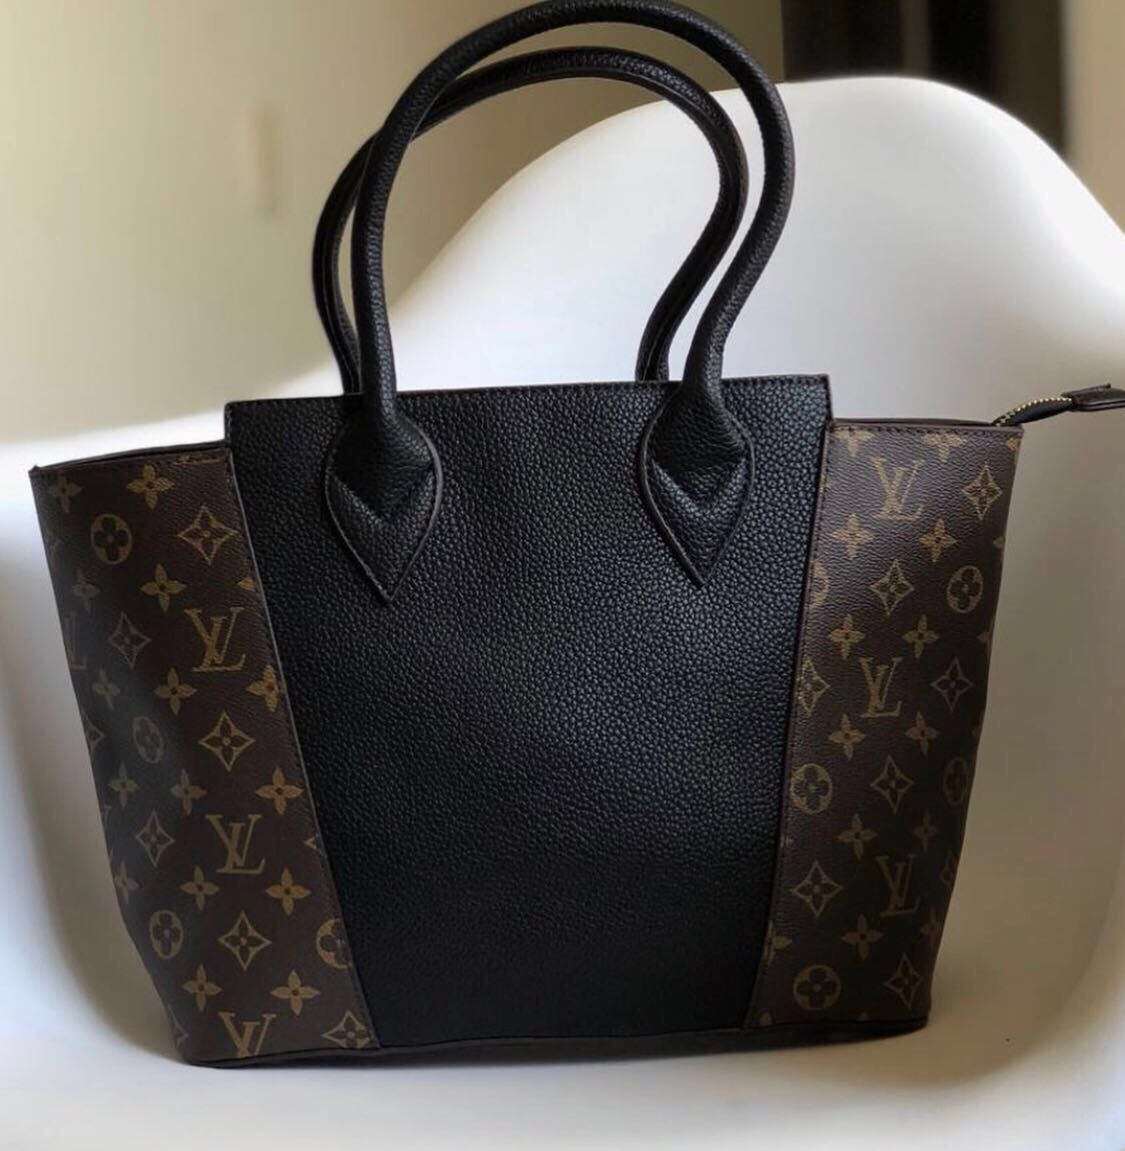 Bolso Louis Vuitton Mujer Clasico | Confederated Tribes of the Umatilla Indian Reservation